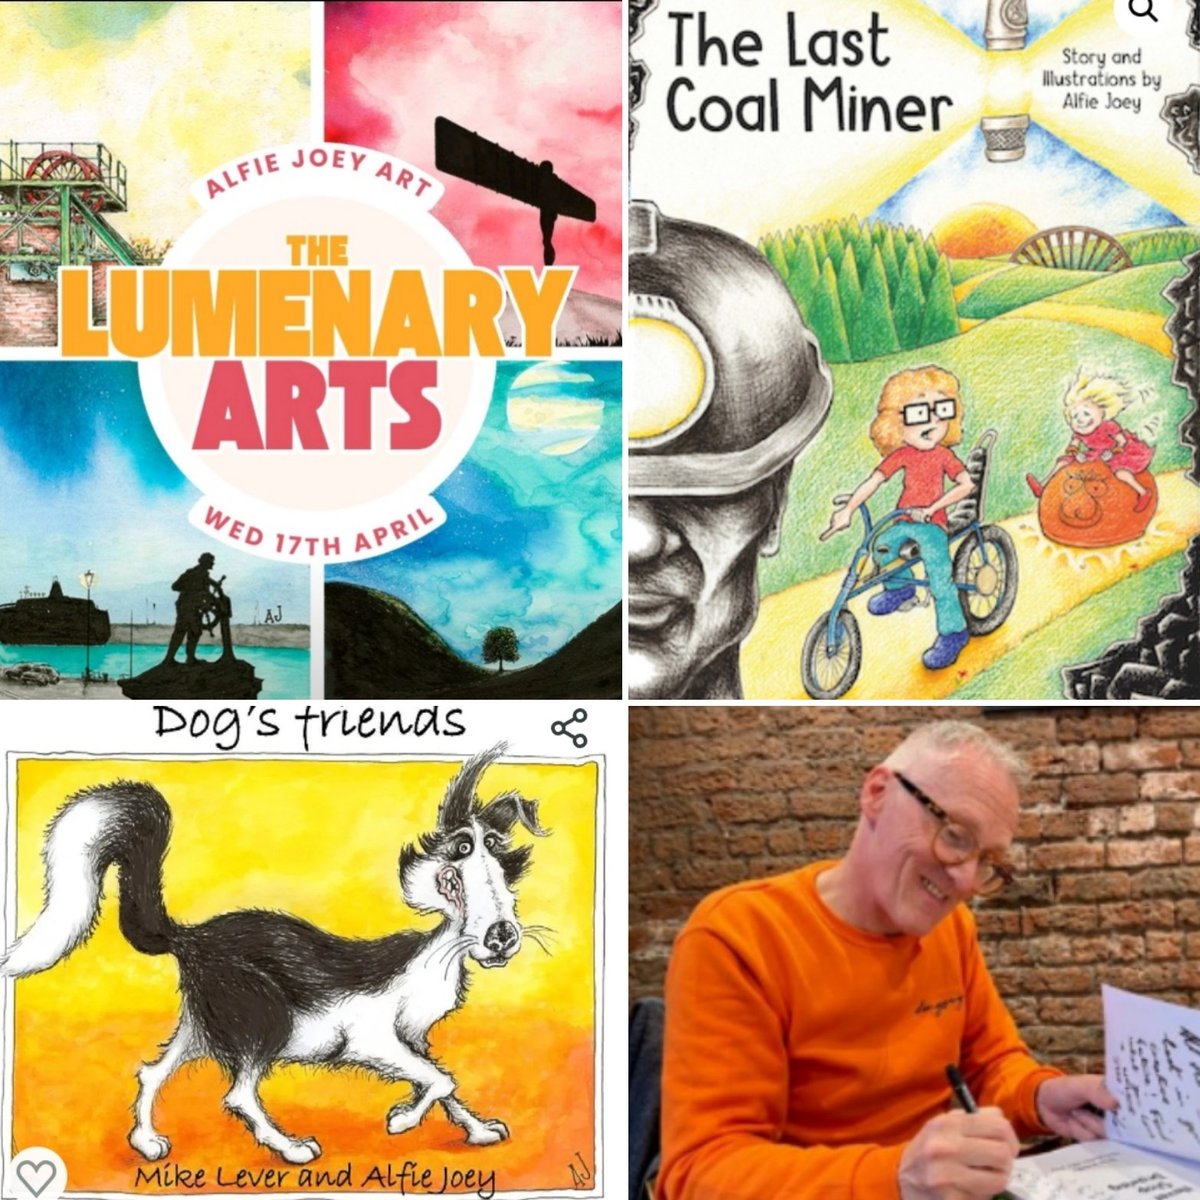 On #WorldArtDay I will be at The Lumen 11am - 6pm - my first art stall at Newcastle Helix ! Pop along on Weds, 17th April. Maybe buy an original piece of #AlfArt or just browse through my children's books & panto designs for @thecustomshouse !